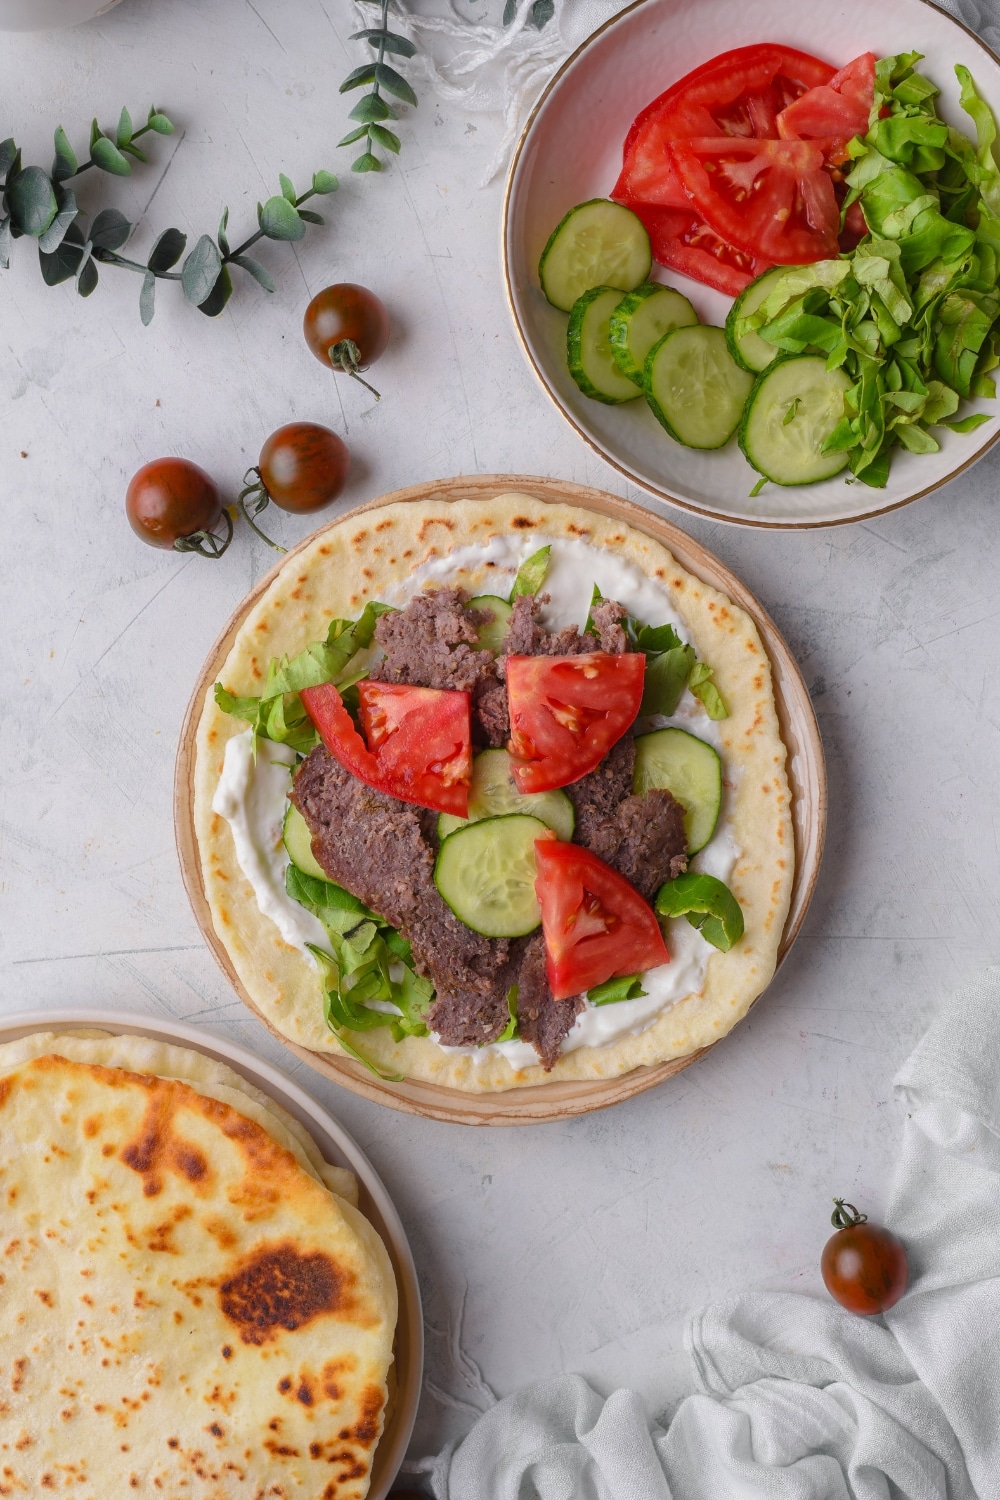 An open-face gyro with tzatziki sauce, lettuce, thinly sliced beef, cucumber, and tomato slices. The gyro is next to a bowl of veggies.